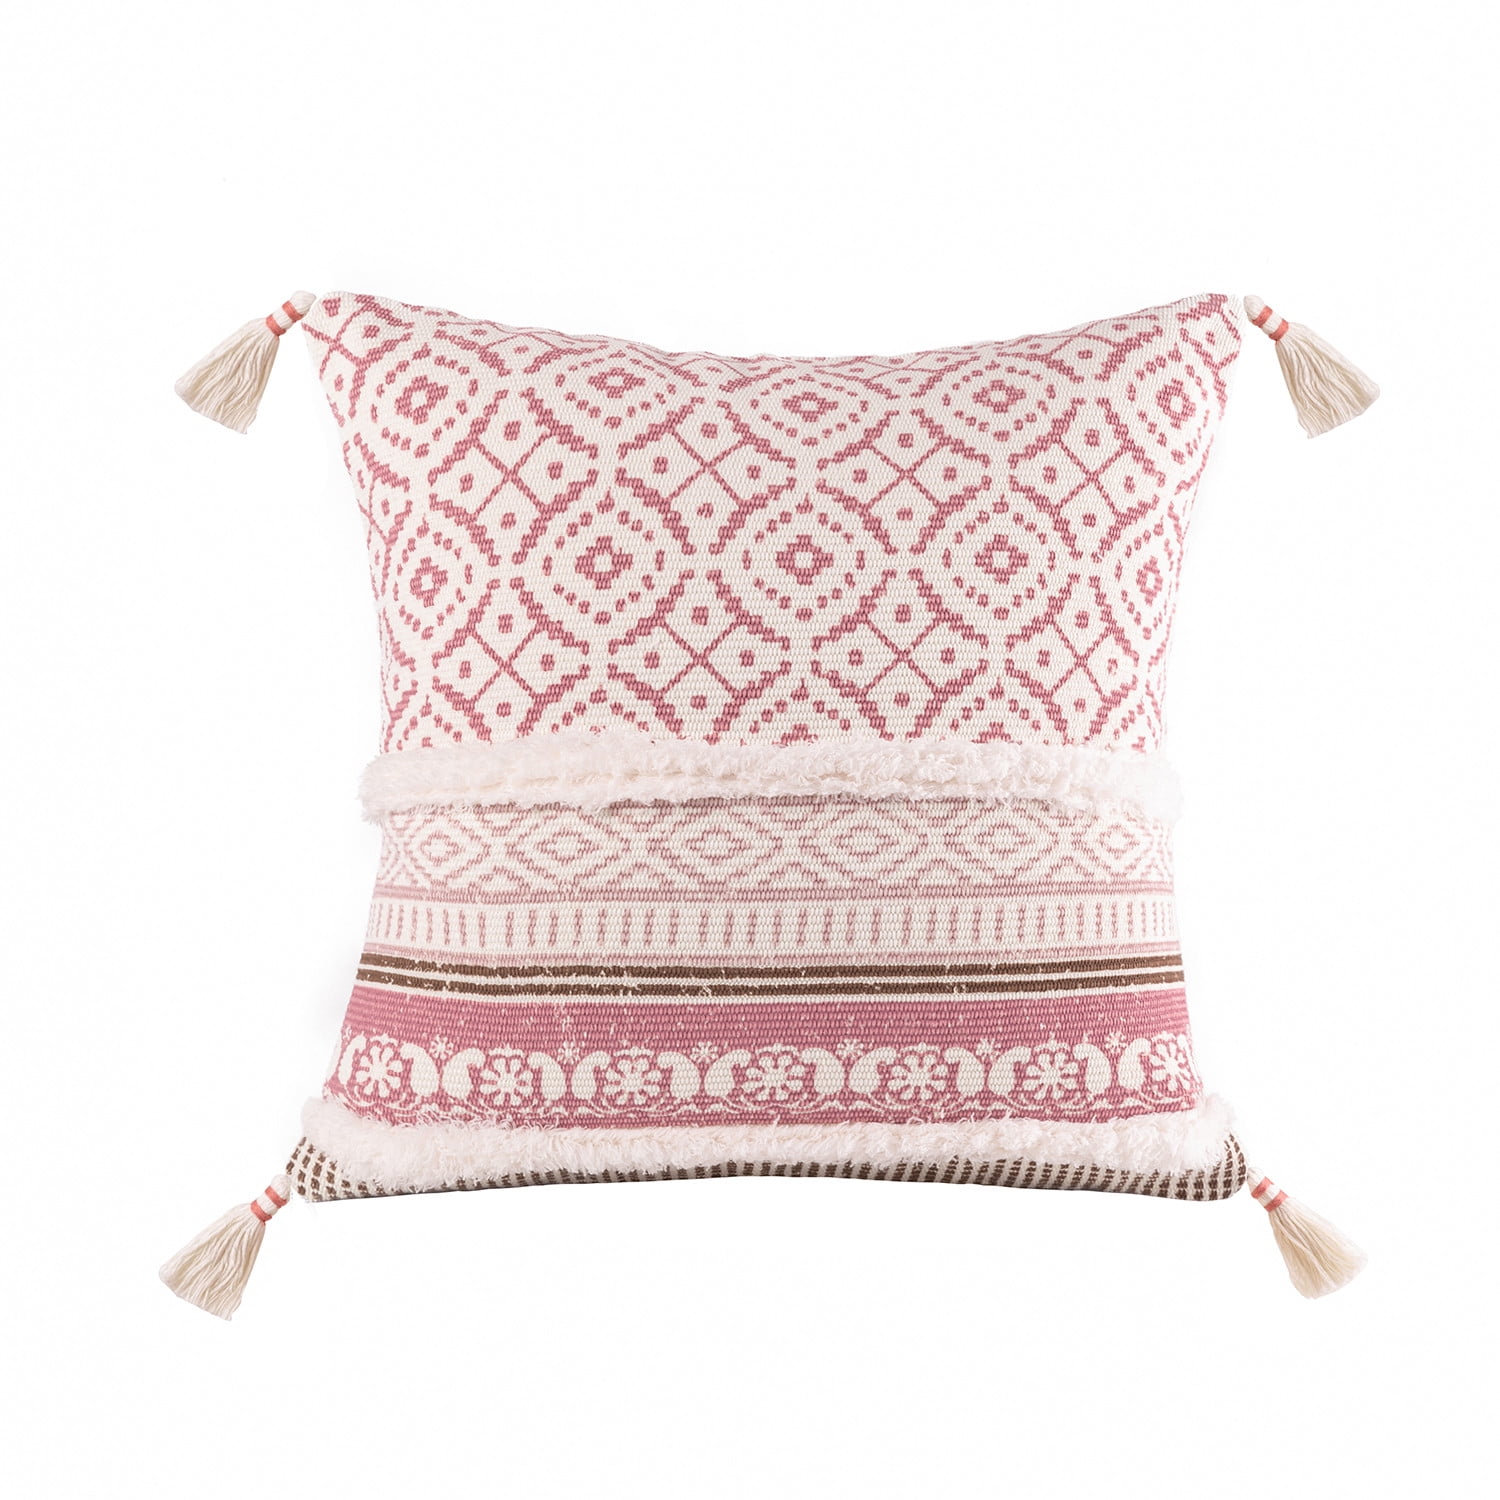 Phantoscope 100% Cotton Handmade Crochet Boho Series with Invisible Zipper Throw Pillow, 18 inch x 18 inch, Pink, 1 Pack